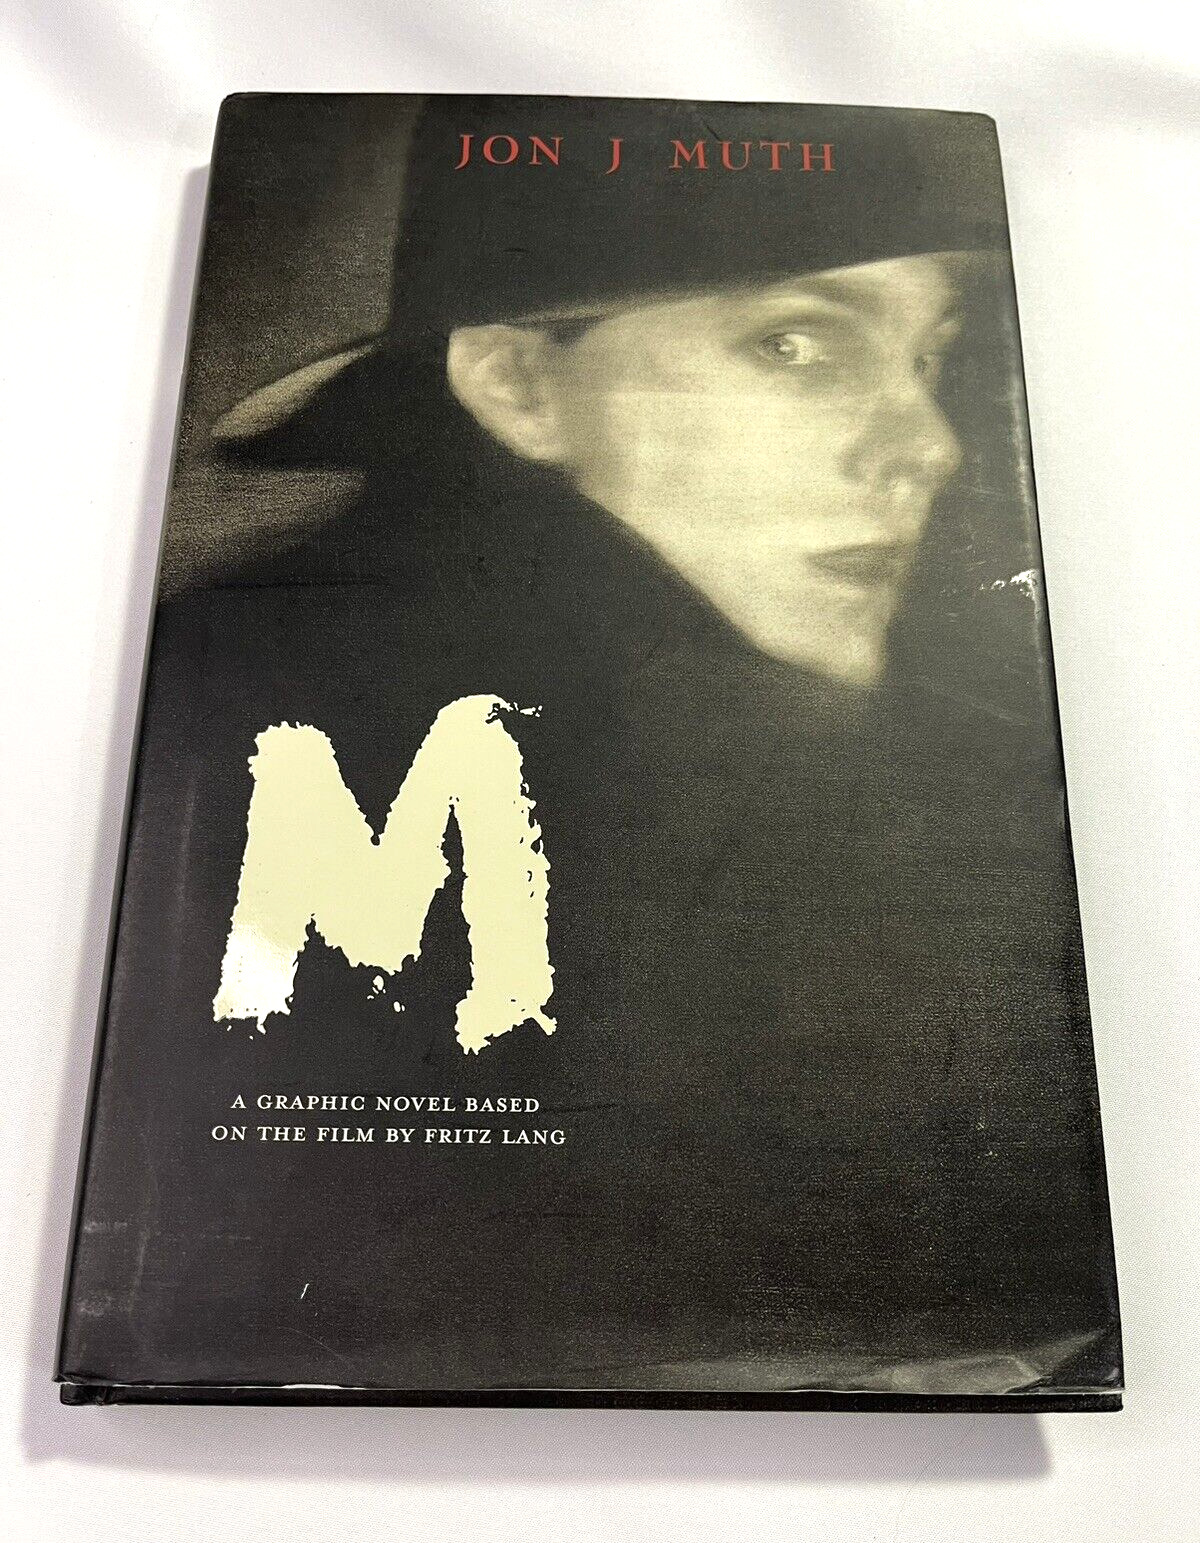 M By Jon J Muth 2008 Hardcover Graphic Novel based on the Film M by Fritz Lang